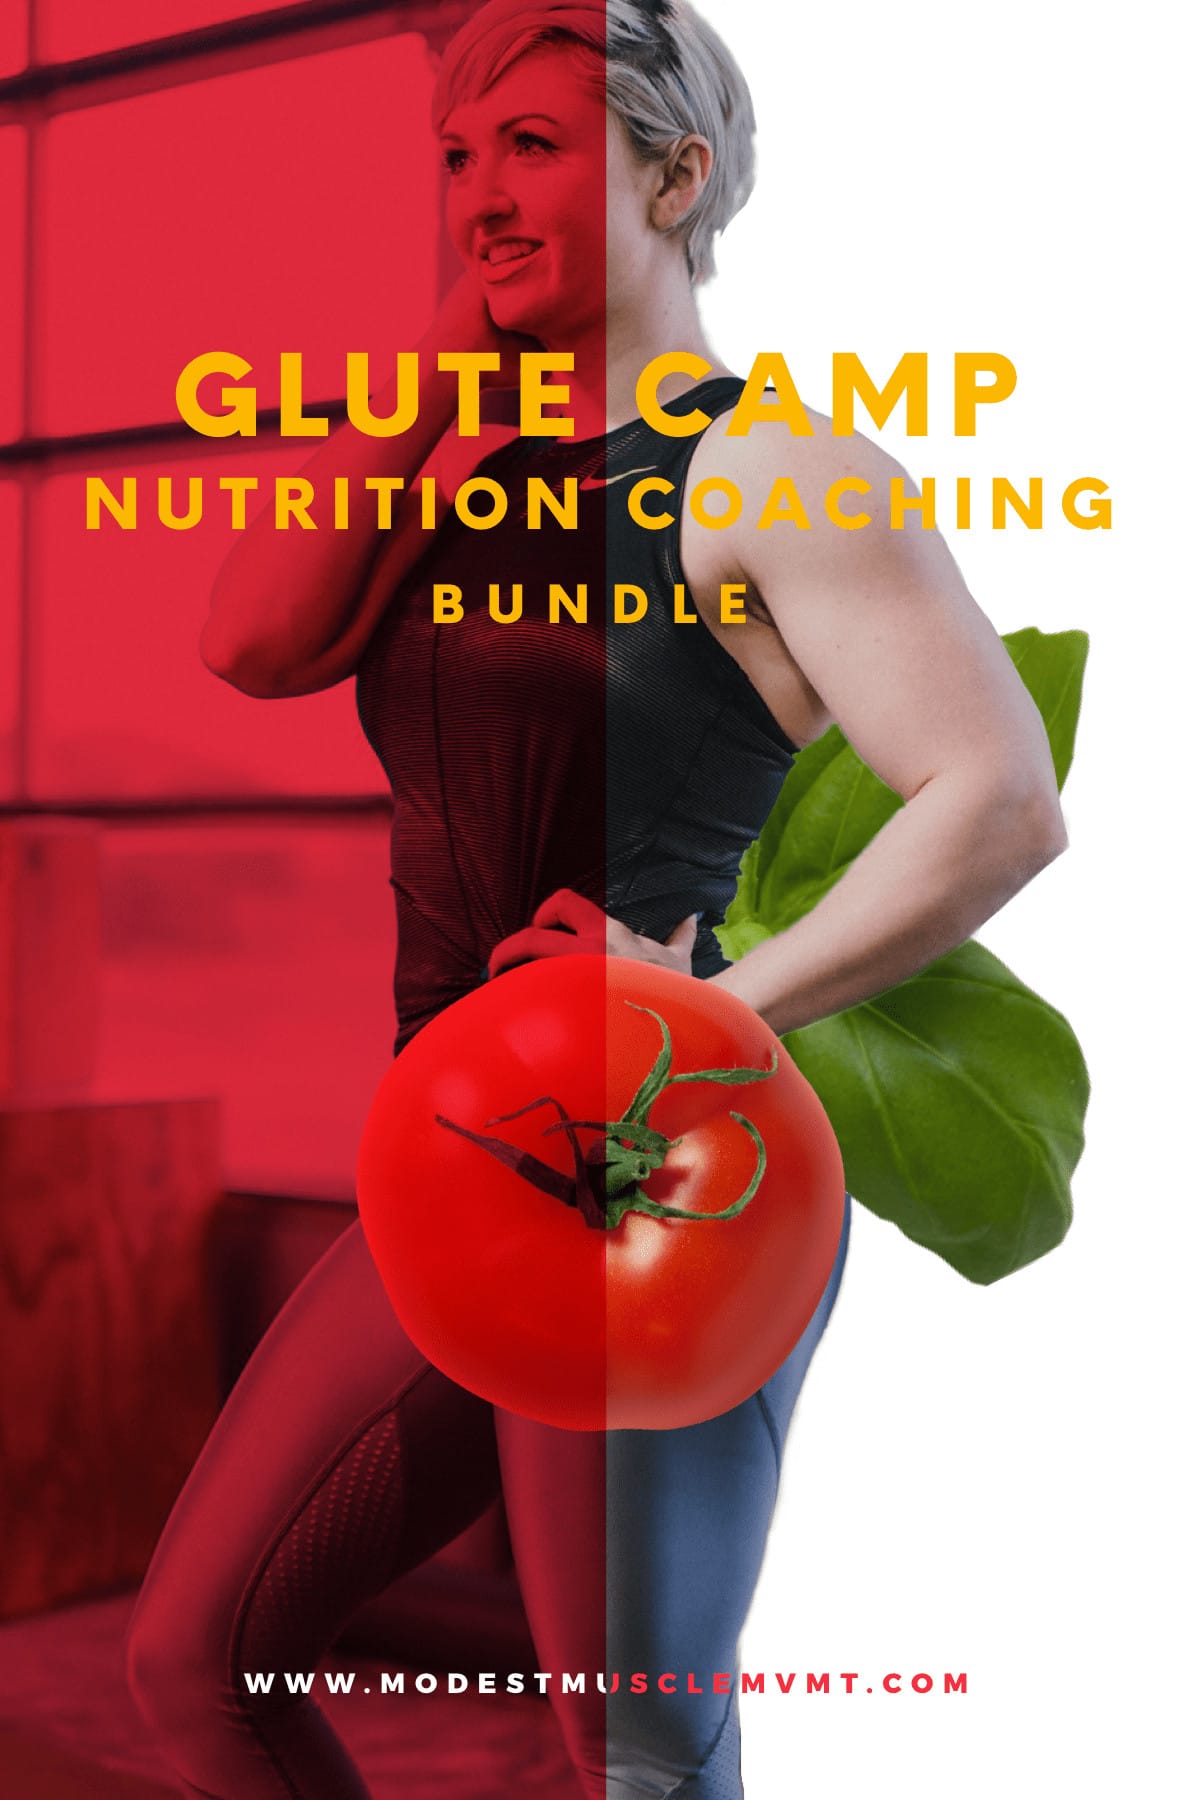 Glute Camp and Nutrition Coaching